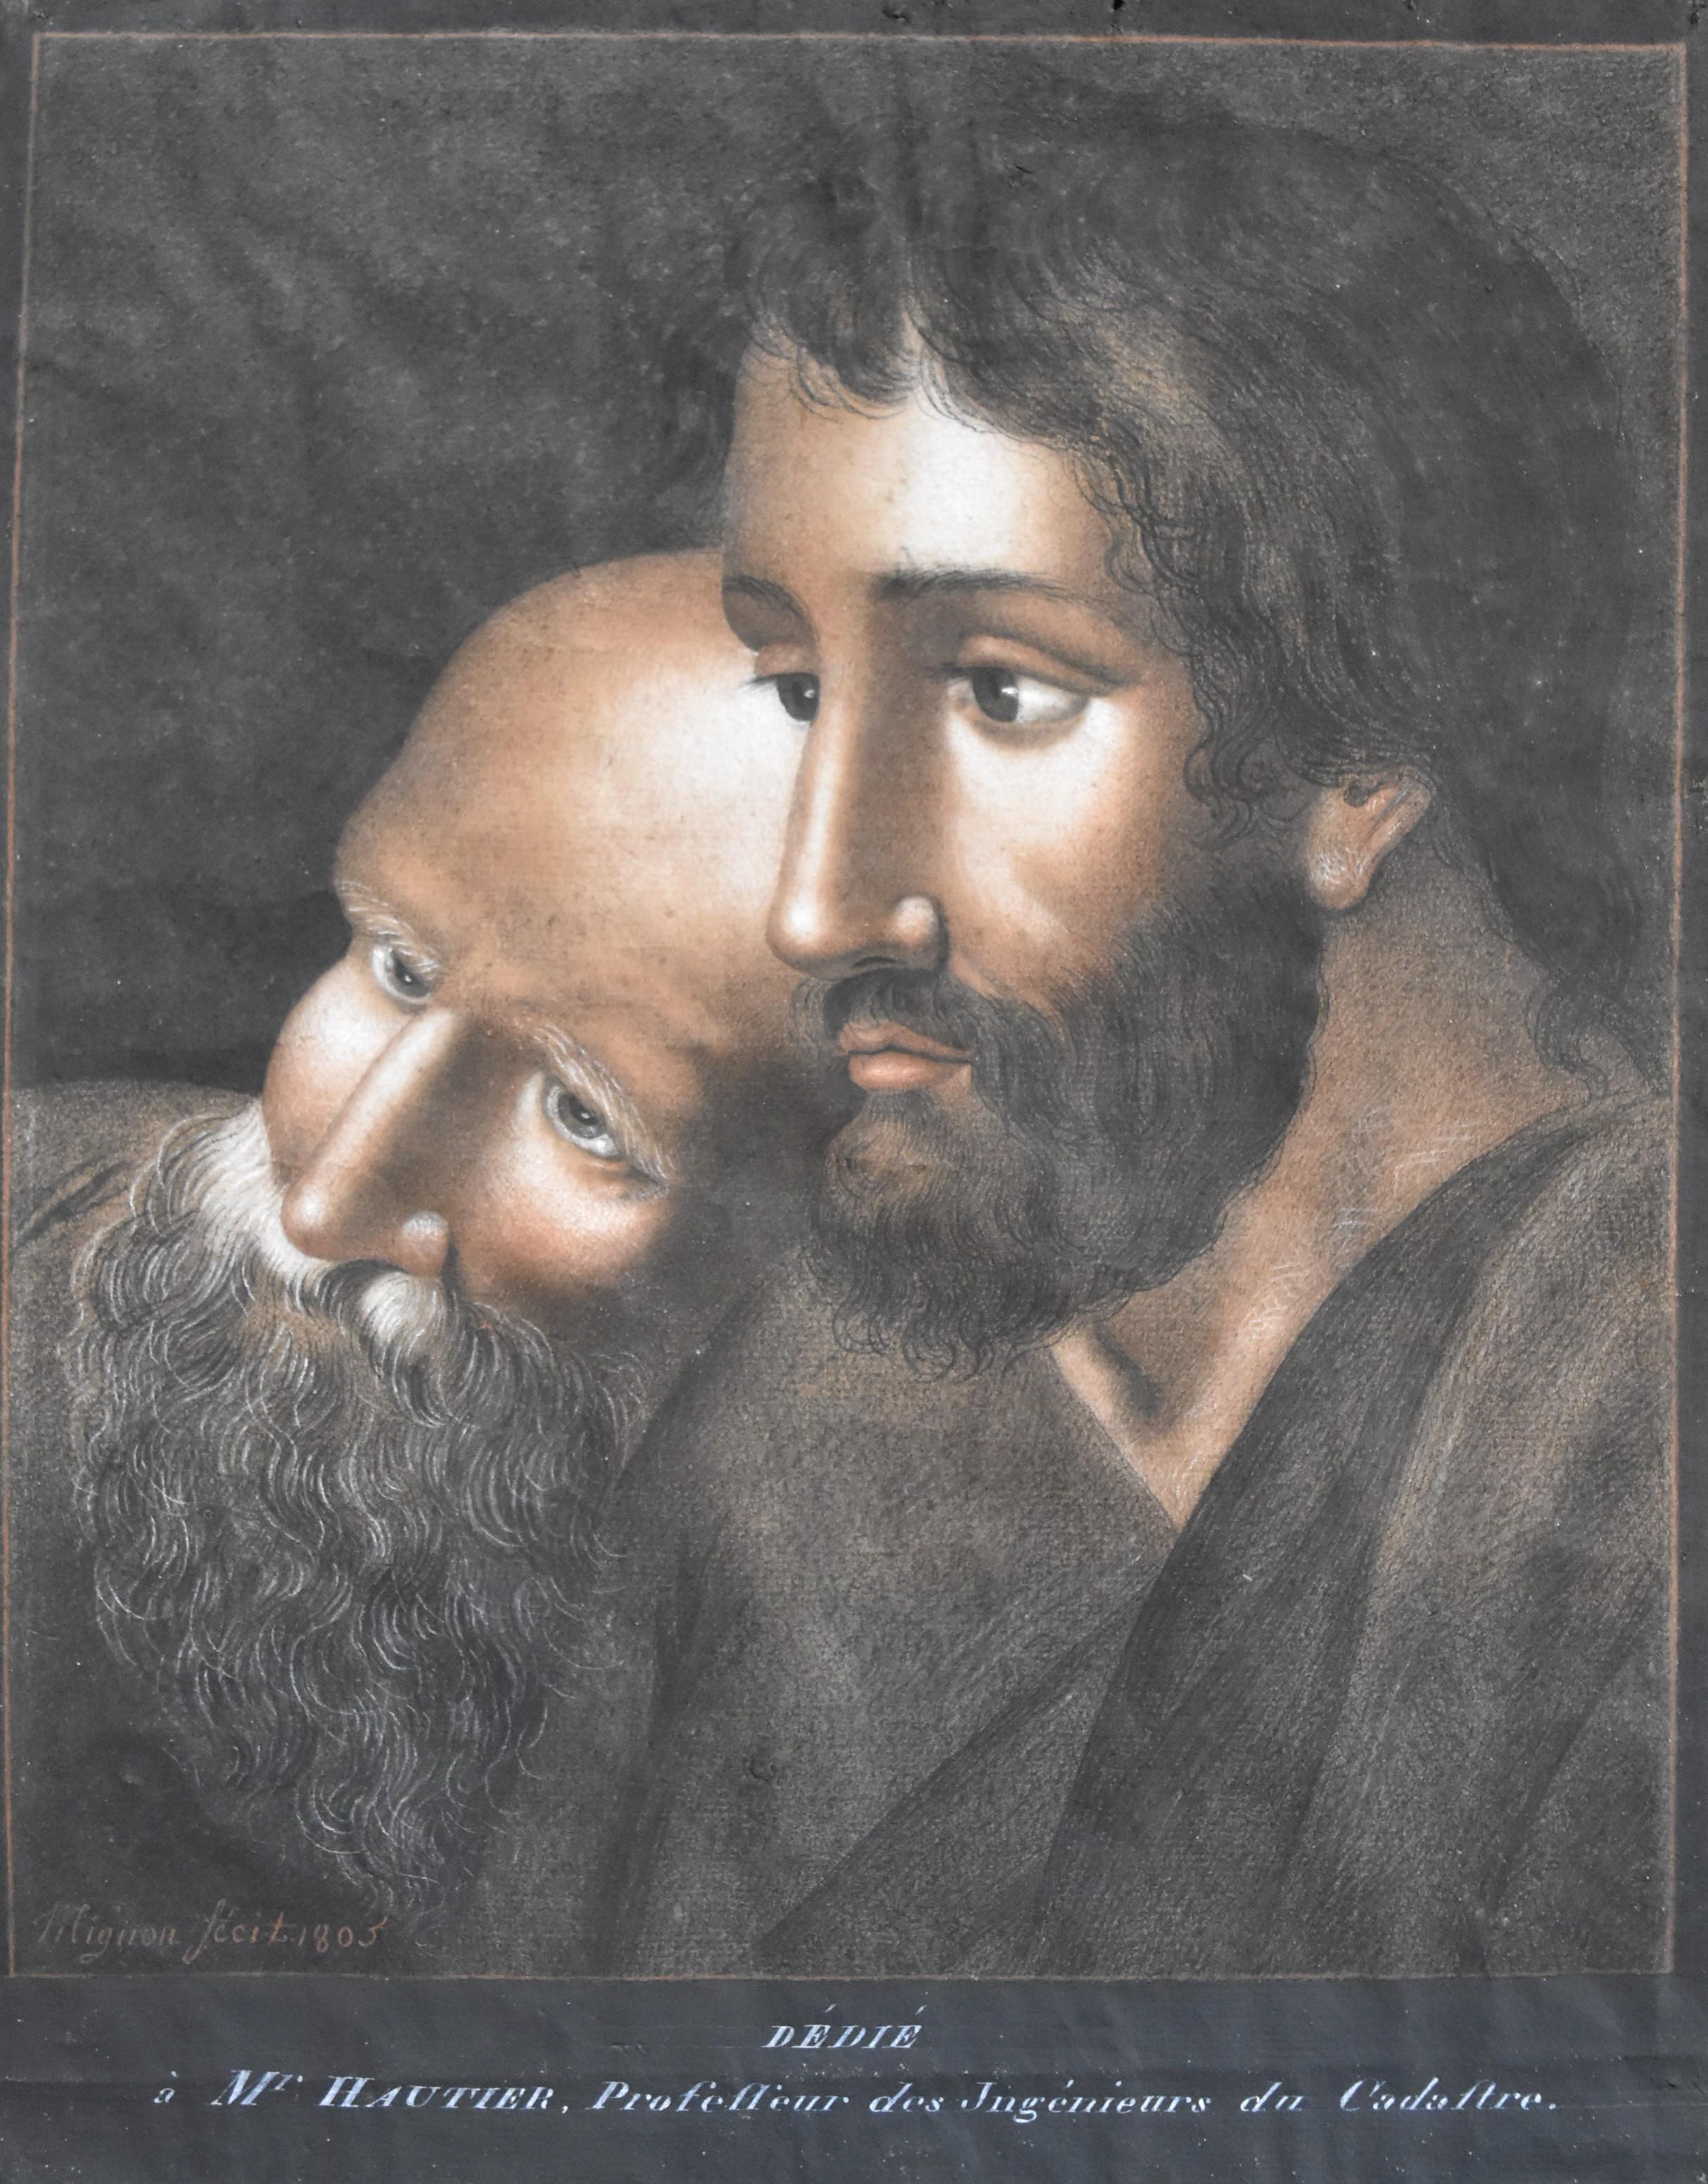 Mignon, Two men, A master and his disciple, 1805, black red and white chalks 